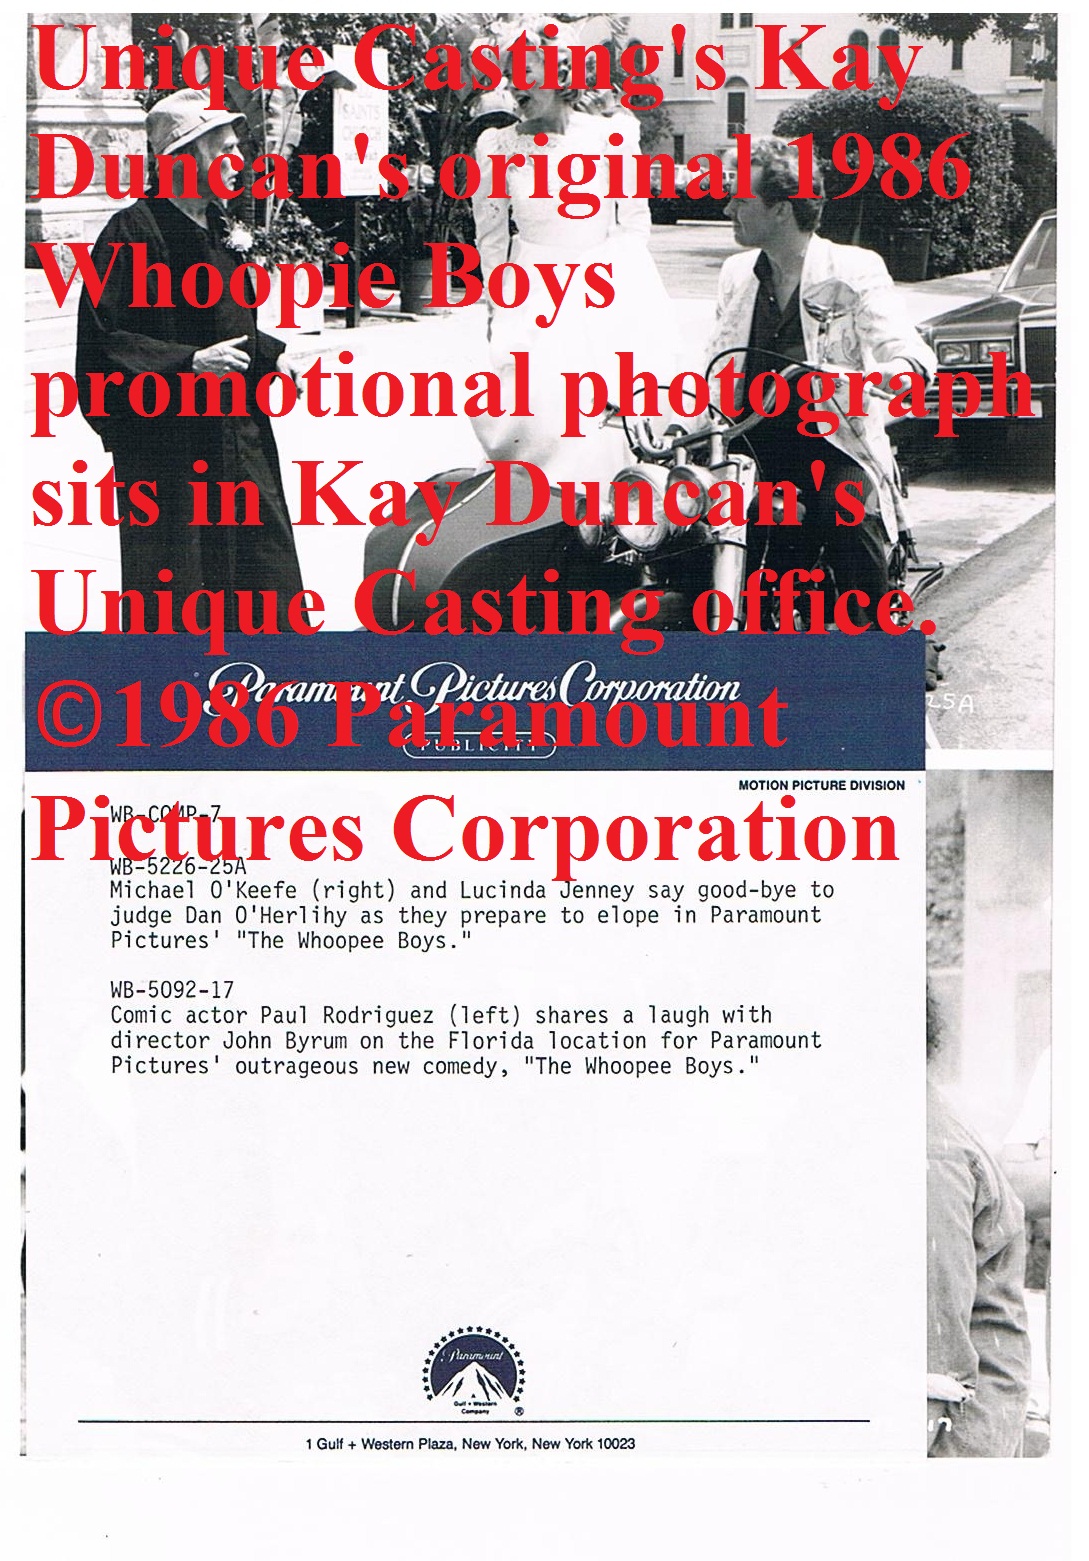 Unique Casting's Original 1986 Whoopie Boys Photo from ©1986 Paramount Pictures Corporation. The original photograph sits in Kay Duncan's Unique Casting office.